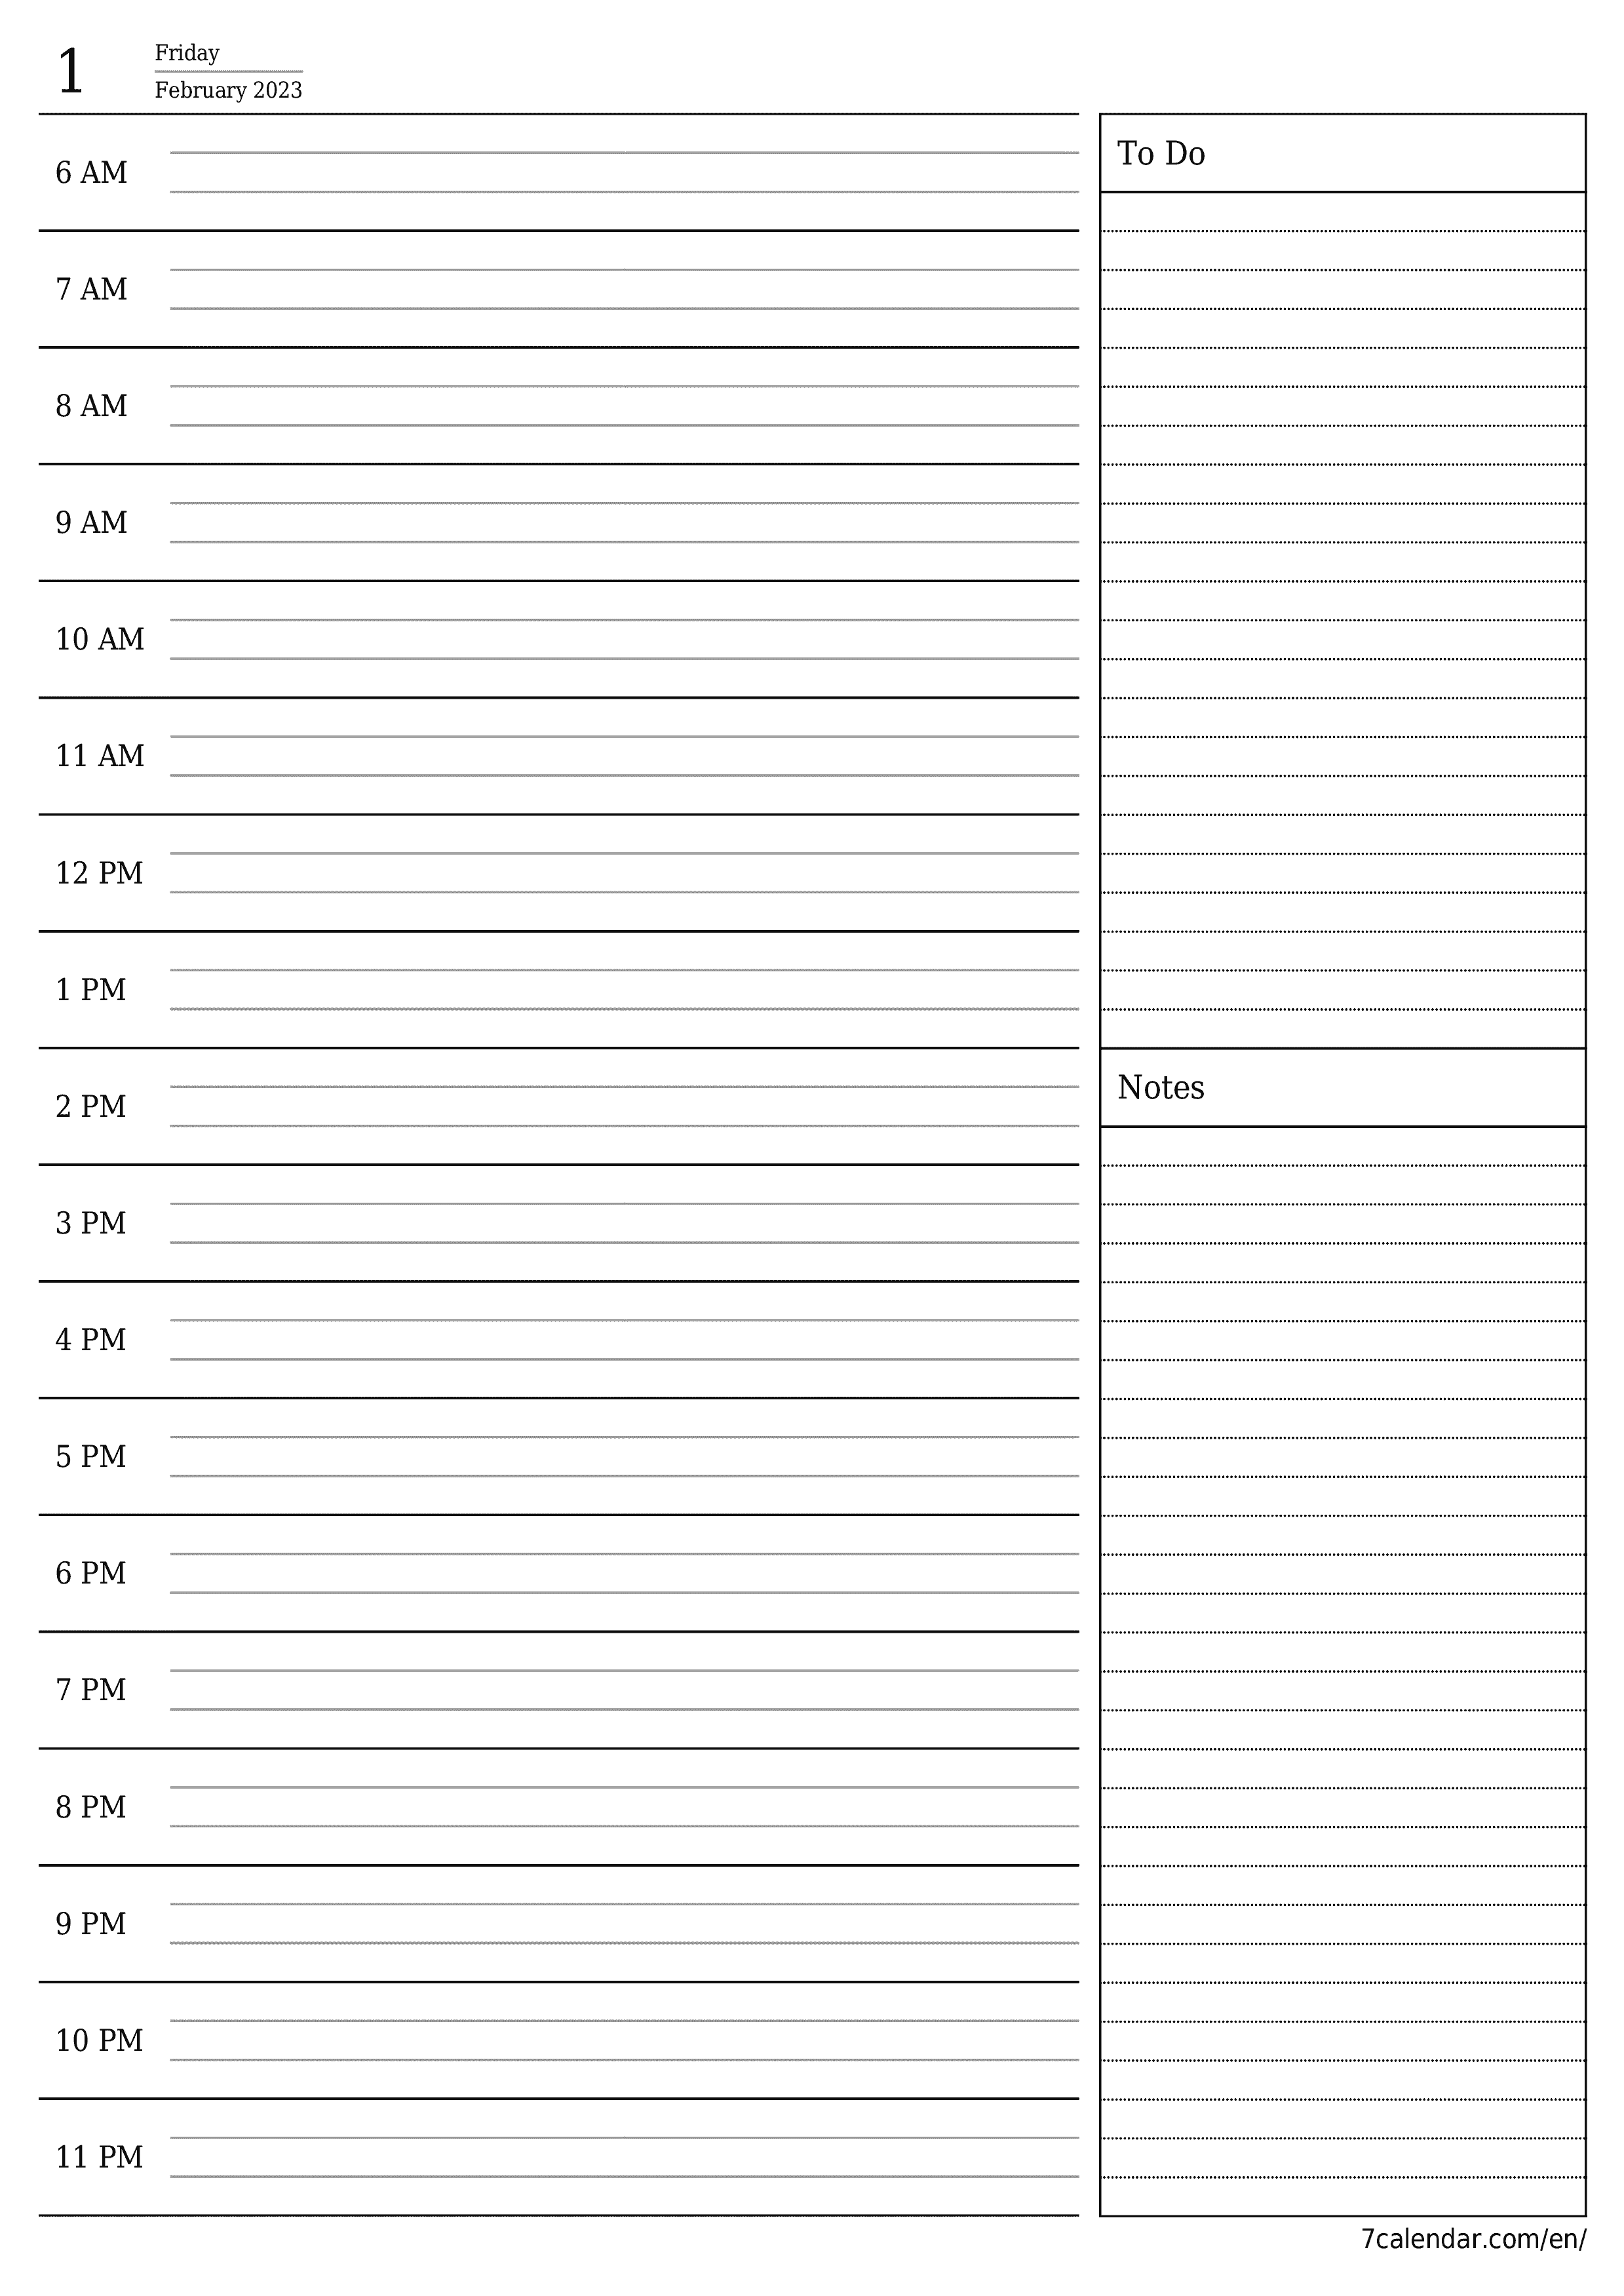 Blank daily calendar planner for day February 2023 with notes, save and print to PDF PNG English - 7calendar.com